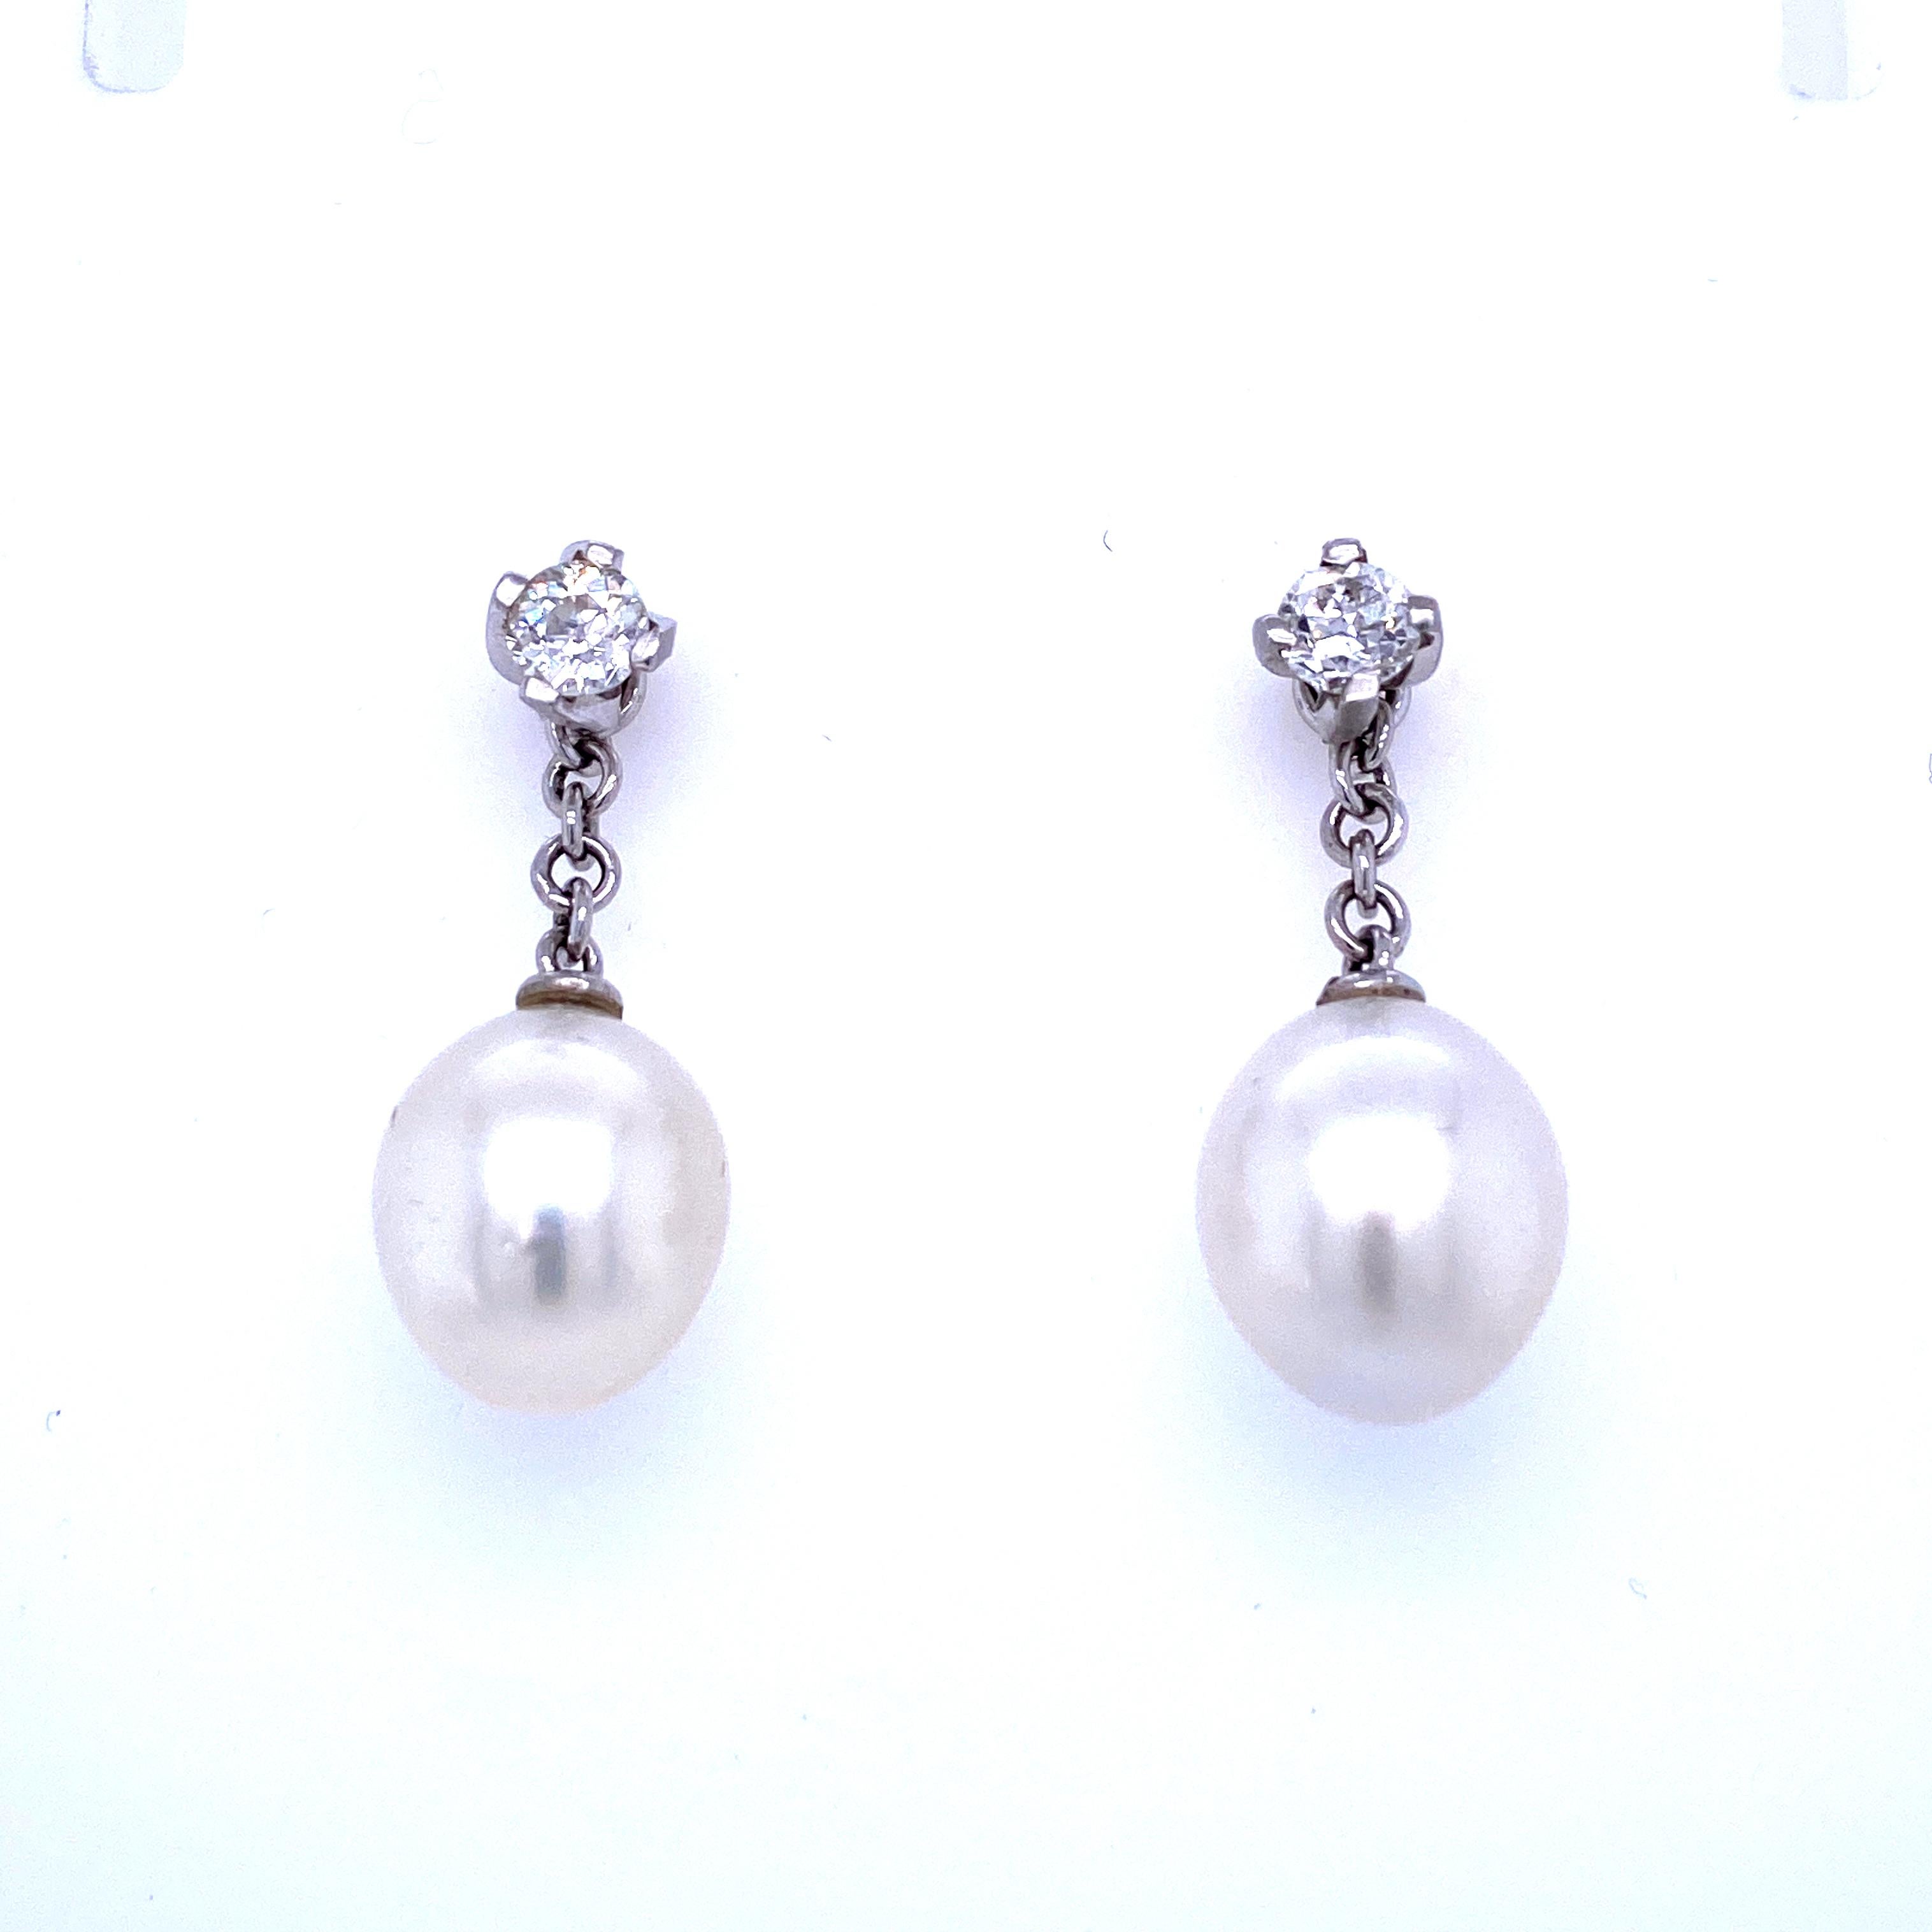 Charming Earrings in Platinum with two high quality Australian south sea pearls, of perfect shape and color, and round brilliant diamonds, graded G color Vvs Clarity.

Wearable as drop earrings with pearls, or just diamond stud